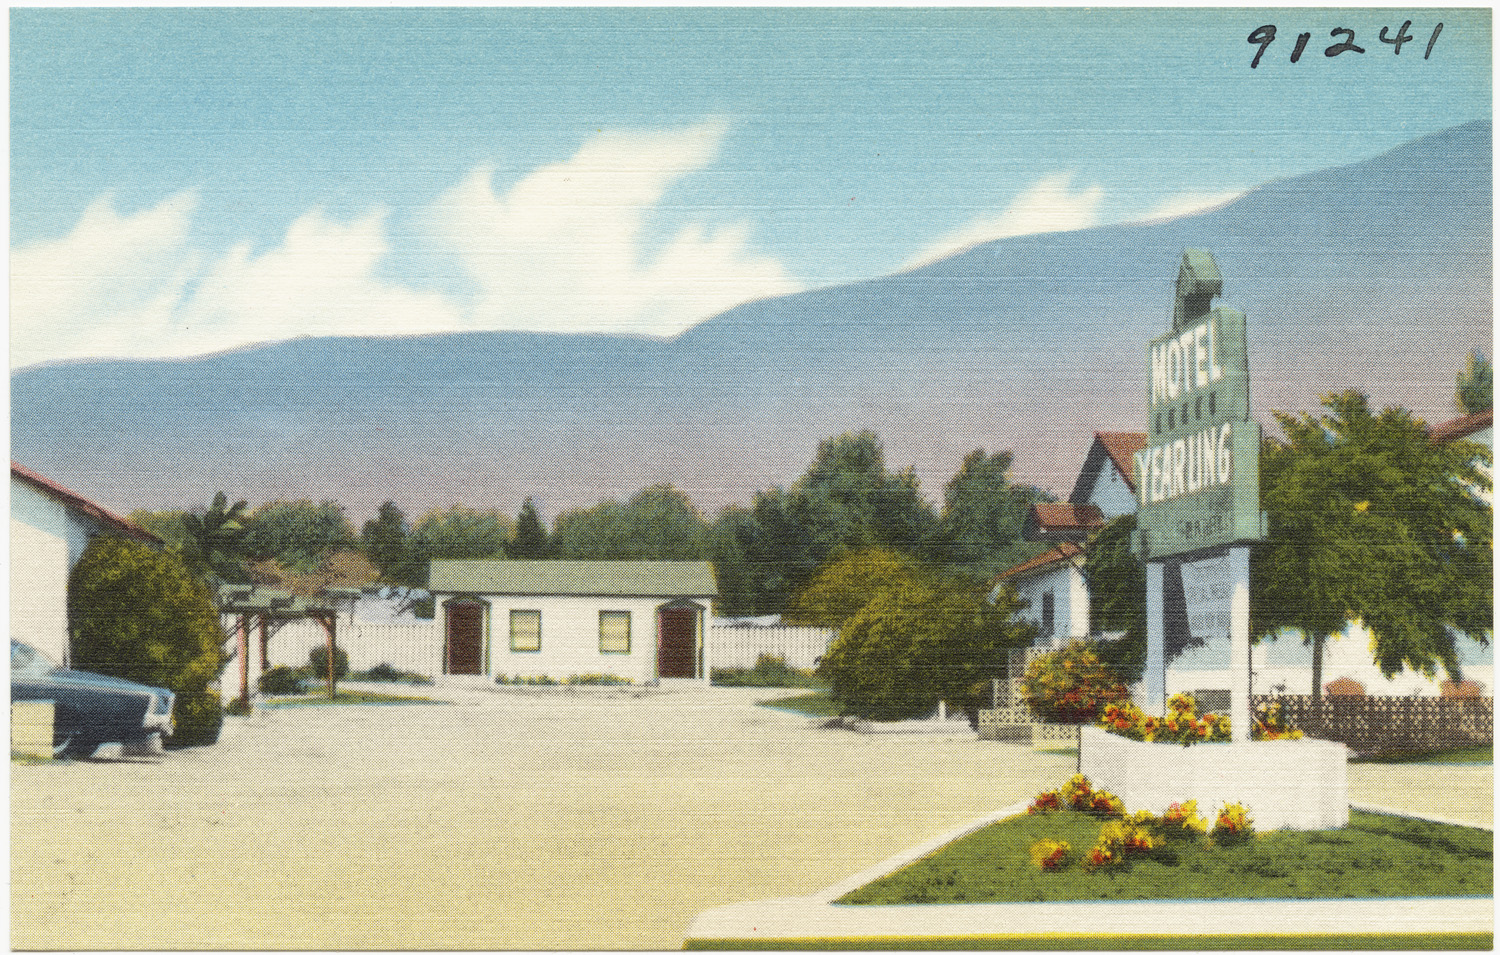 the old postcard shows an image of a town